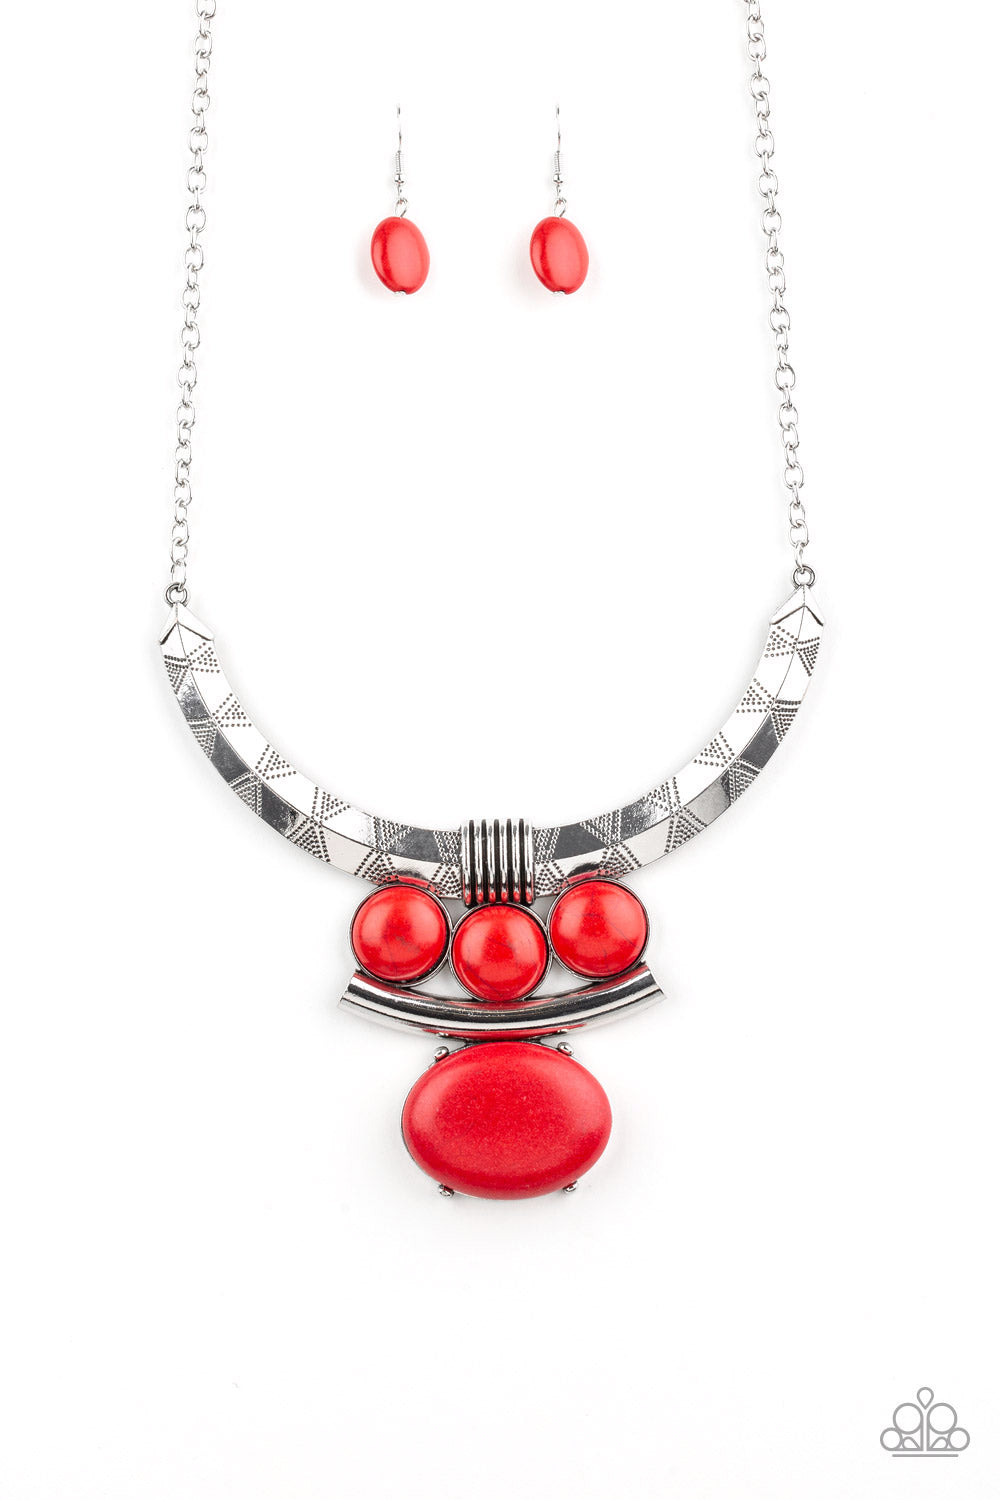 Paparazzi Necklaces - Commander In Chiefette - Red